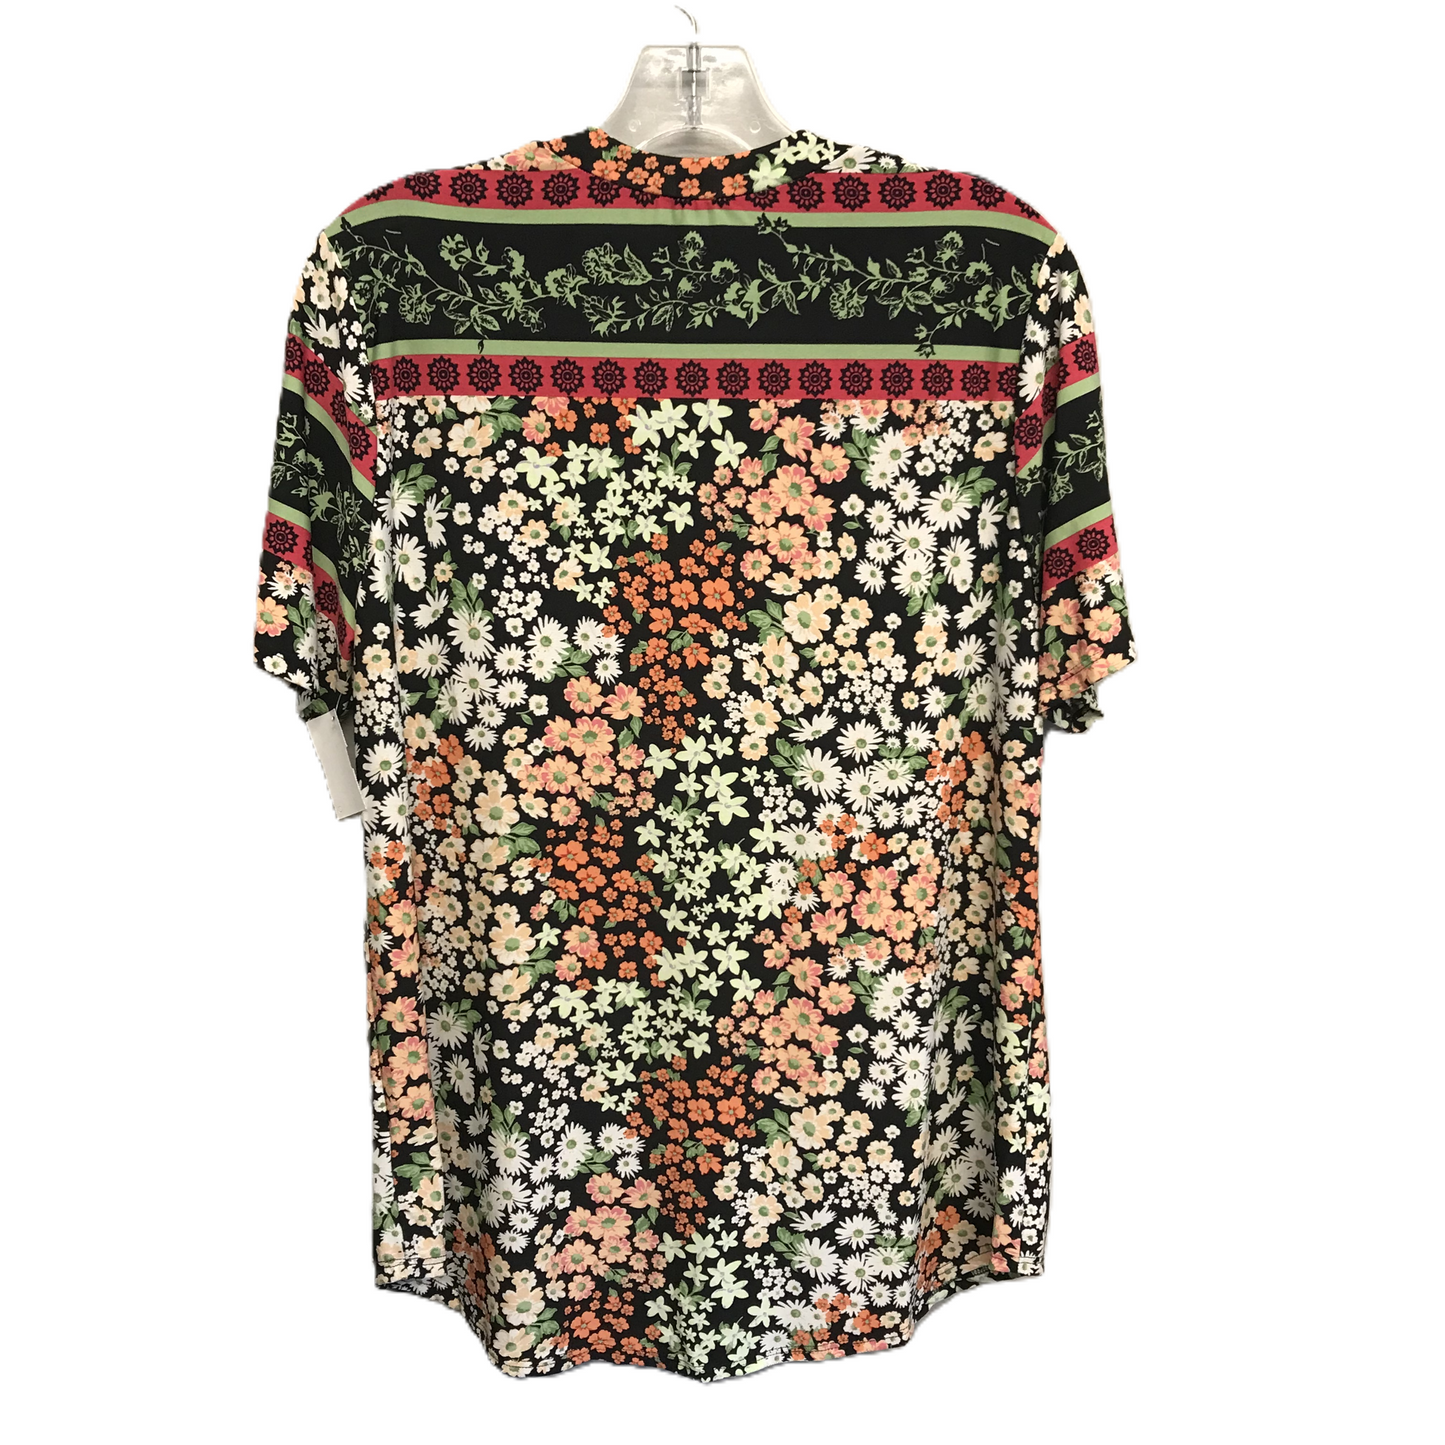 Floral Print Top Short Sleeve By White Birch, Size: L